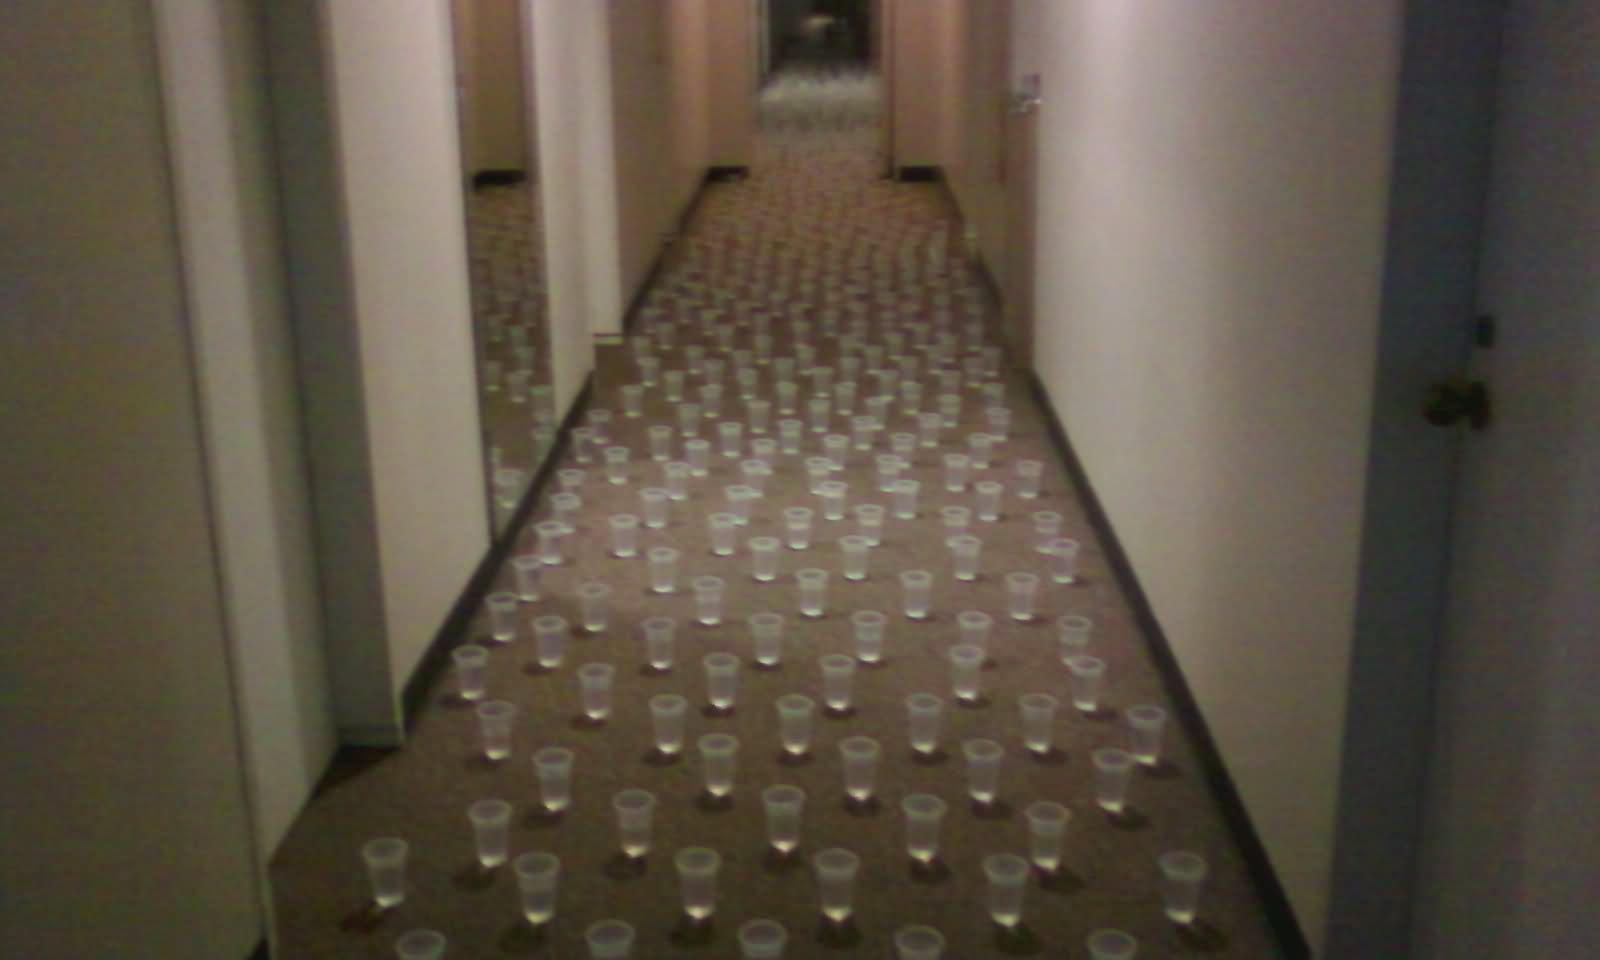 Cups Of Water On Floor Funny April Fool Prank Image